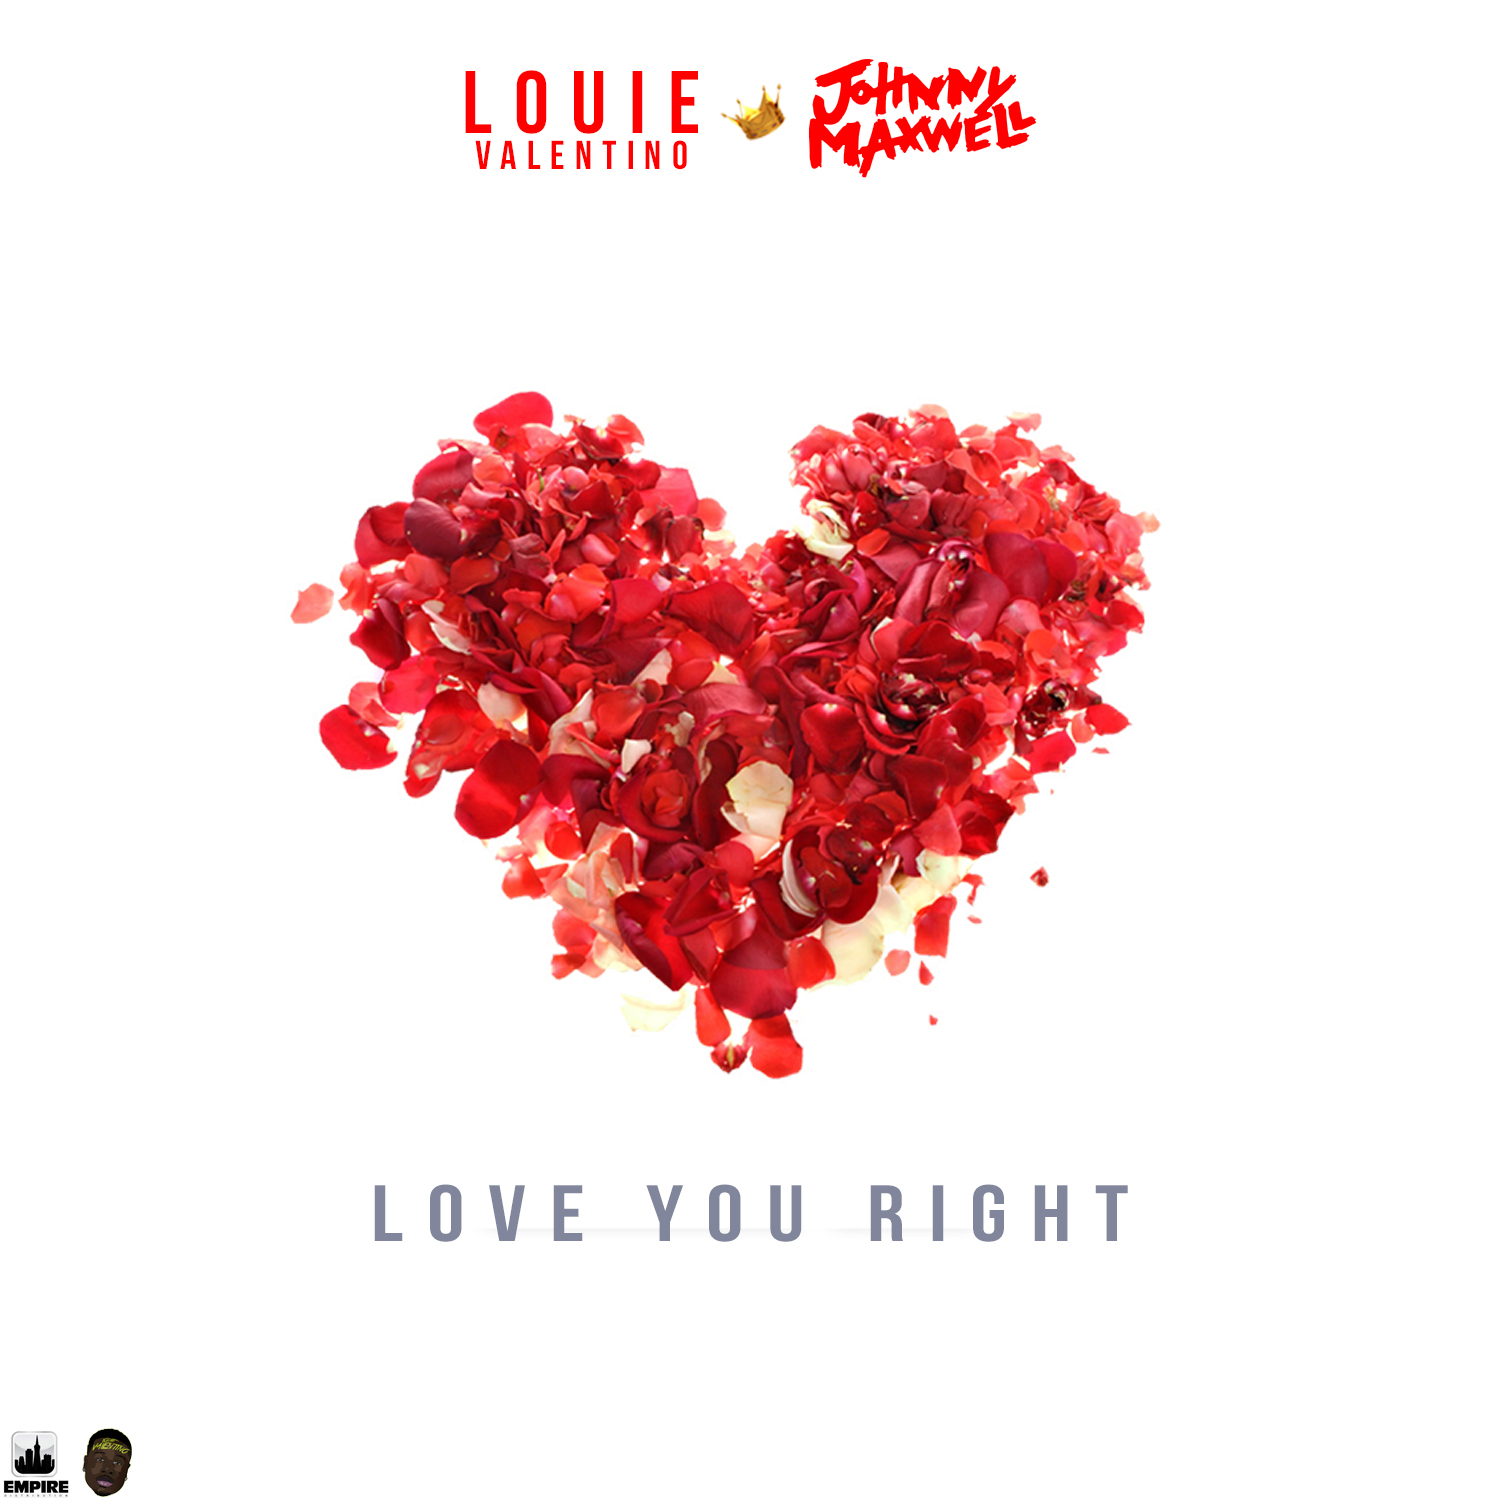 Louie Valentino featuring Johnny Maxwell - "Love You Right"